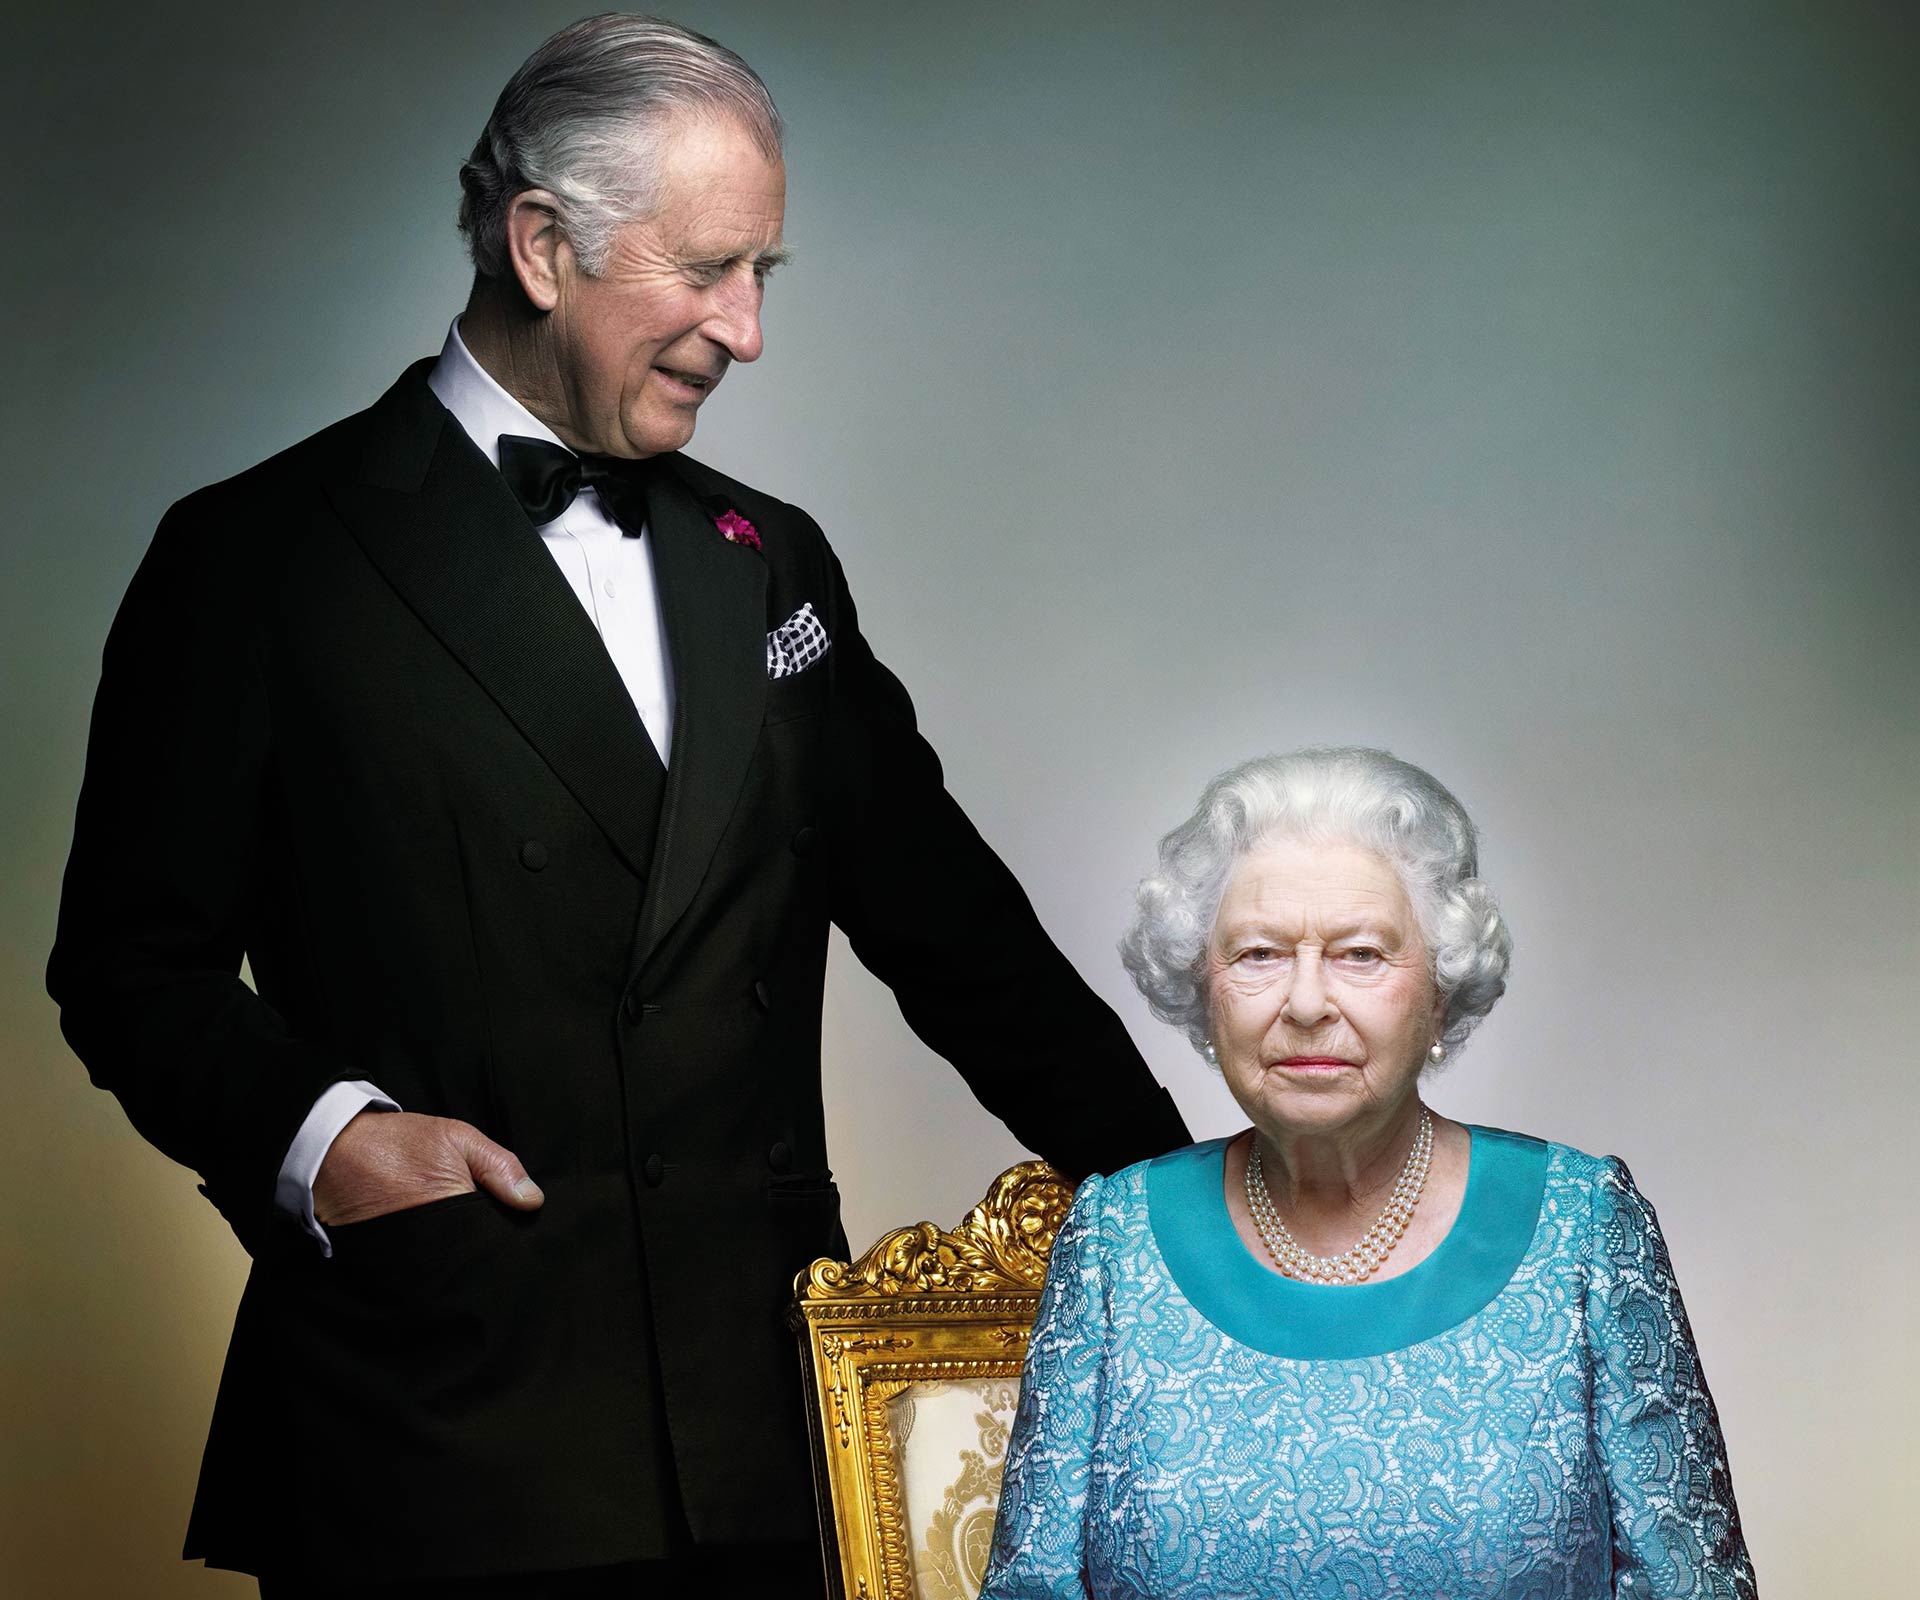 The Queen and Prince Charles over the years